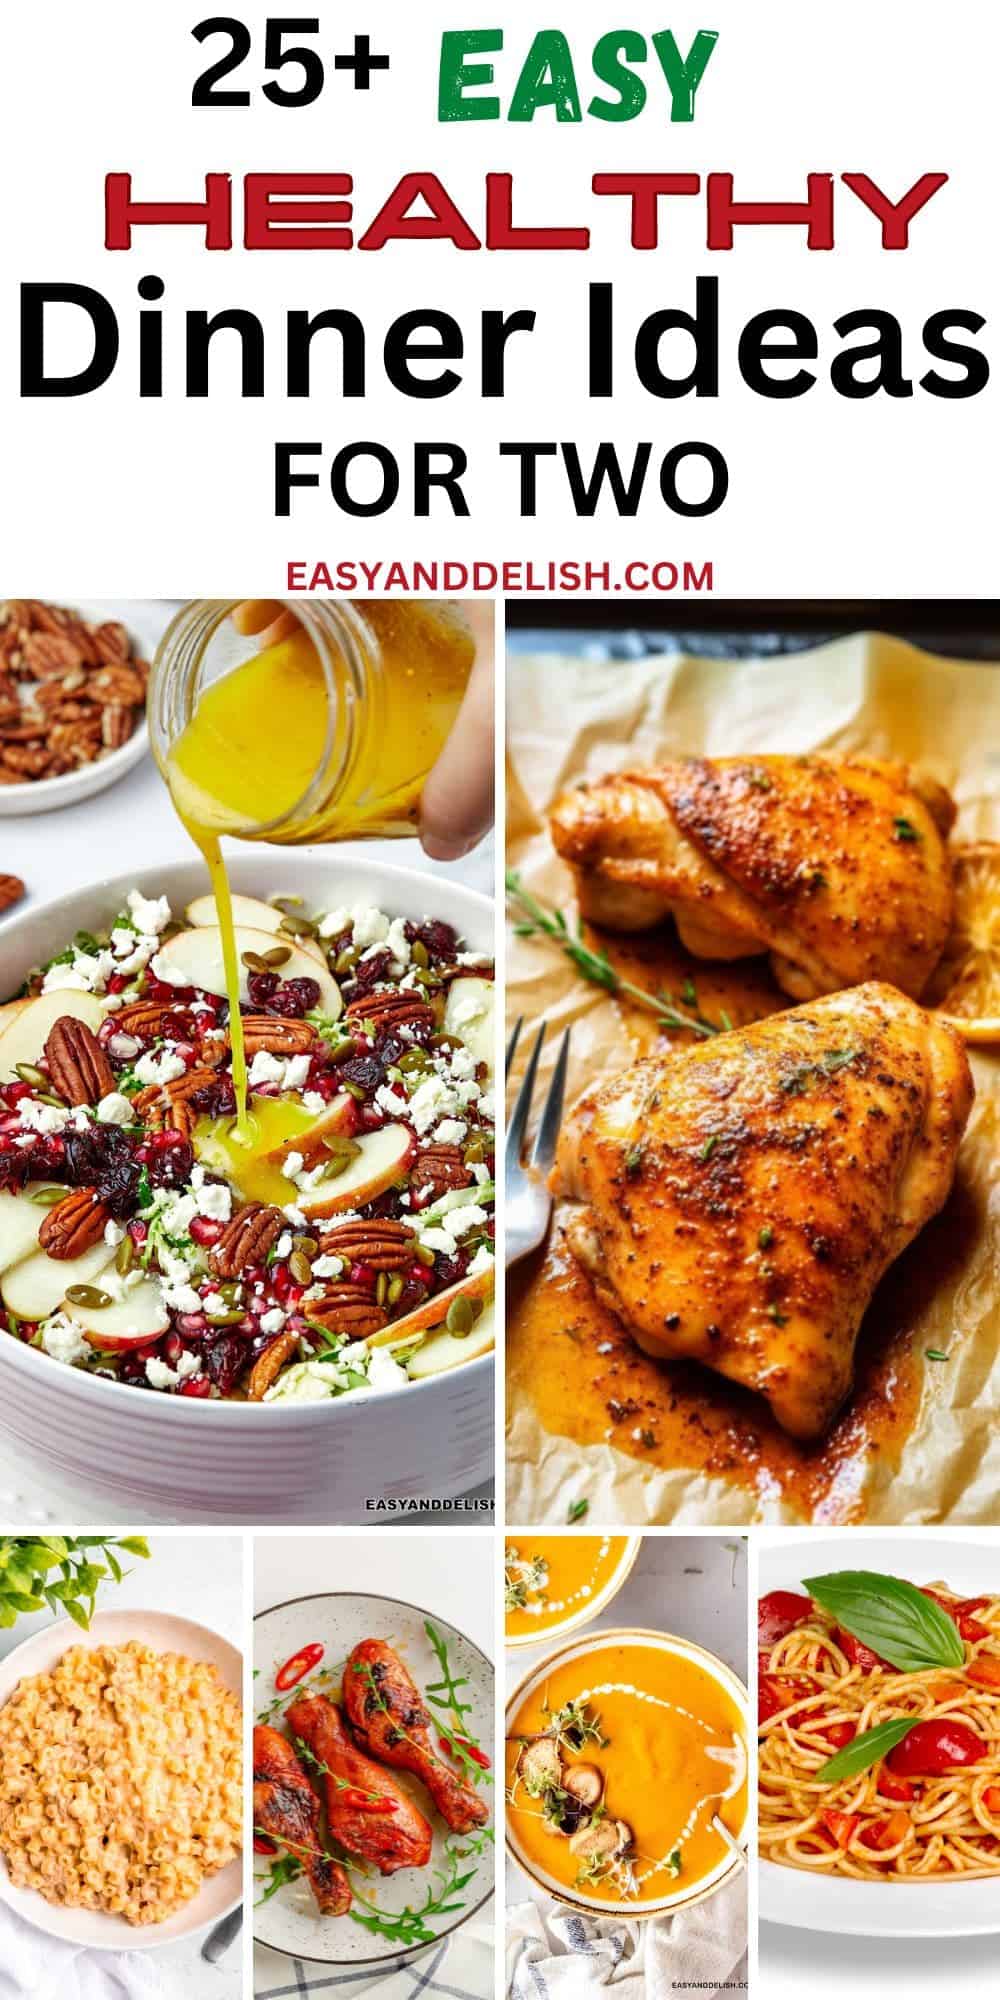 25+ Easy Healthy Dinner Recipes for Two - Easy and Delish